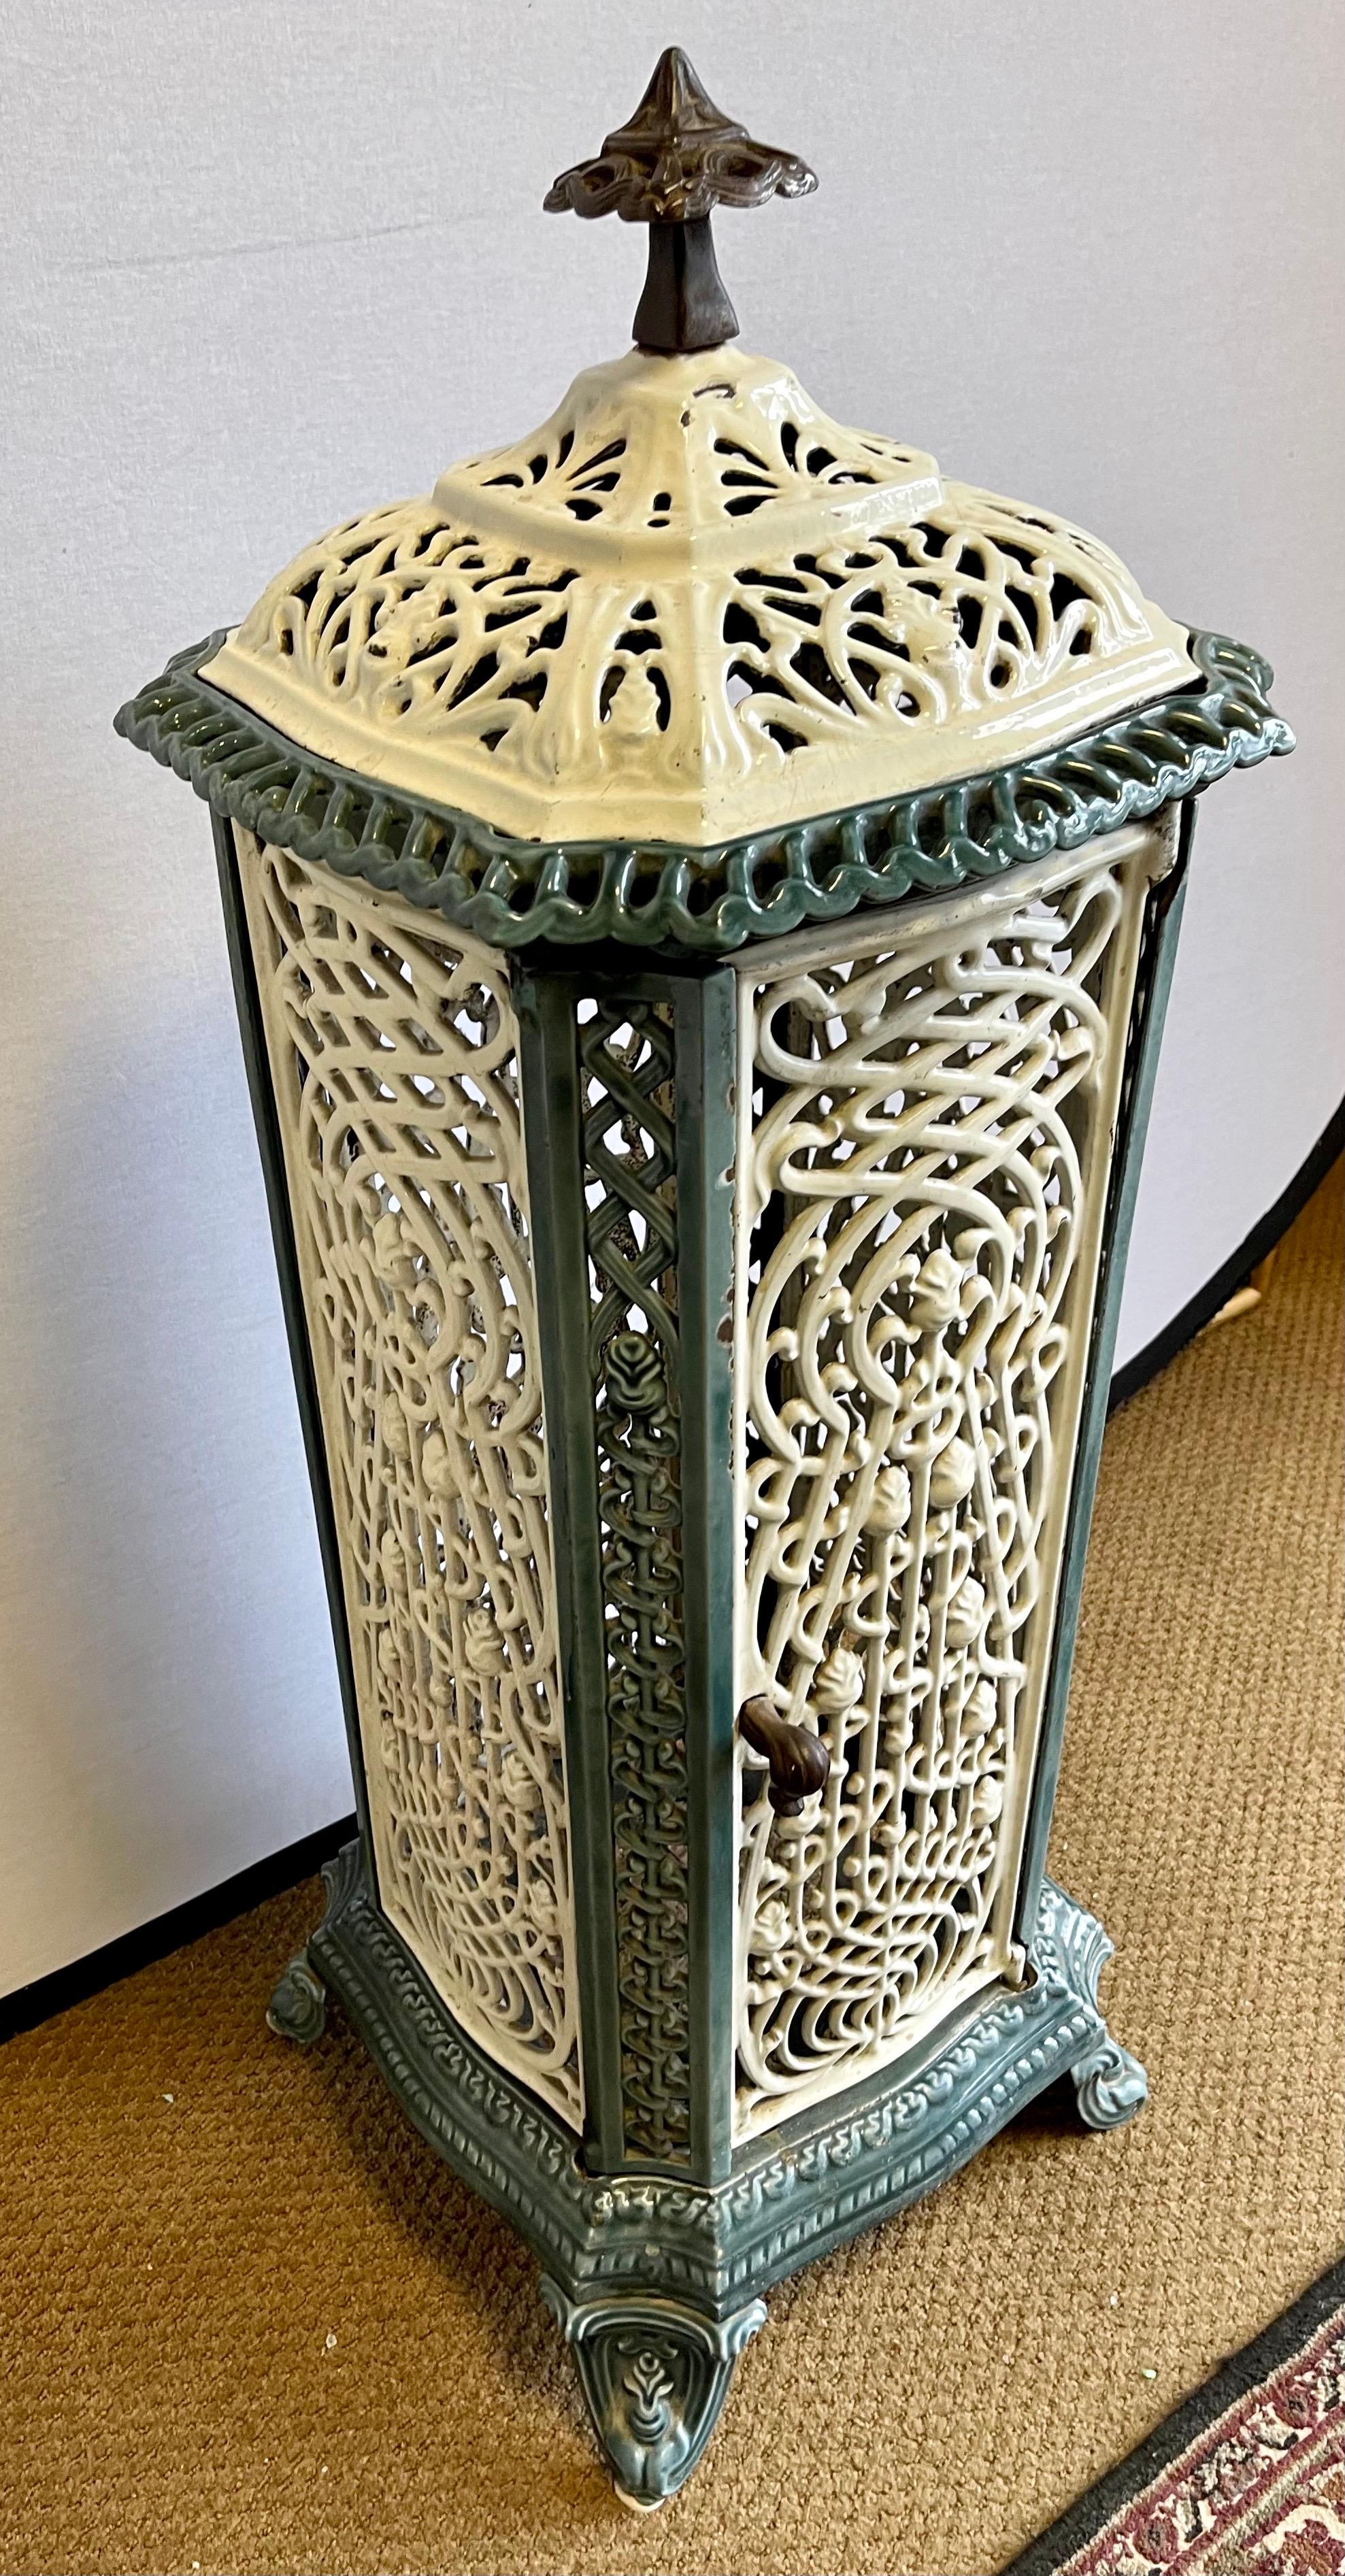 A rare Belgian heater made of cast iron, enamel and porcelain. Iconic European art nouveau. Heavy, with a weight of 70 lbs. Age appropriate wear. Please see all pictures.